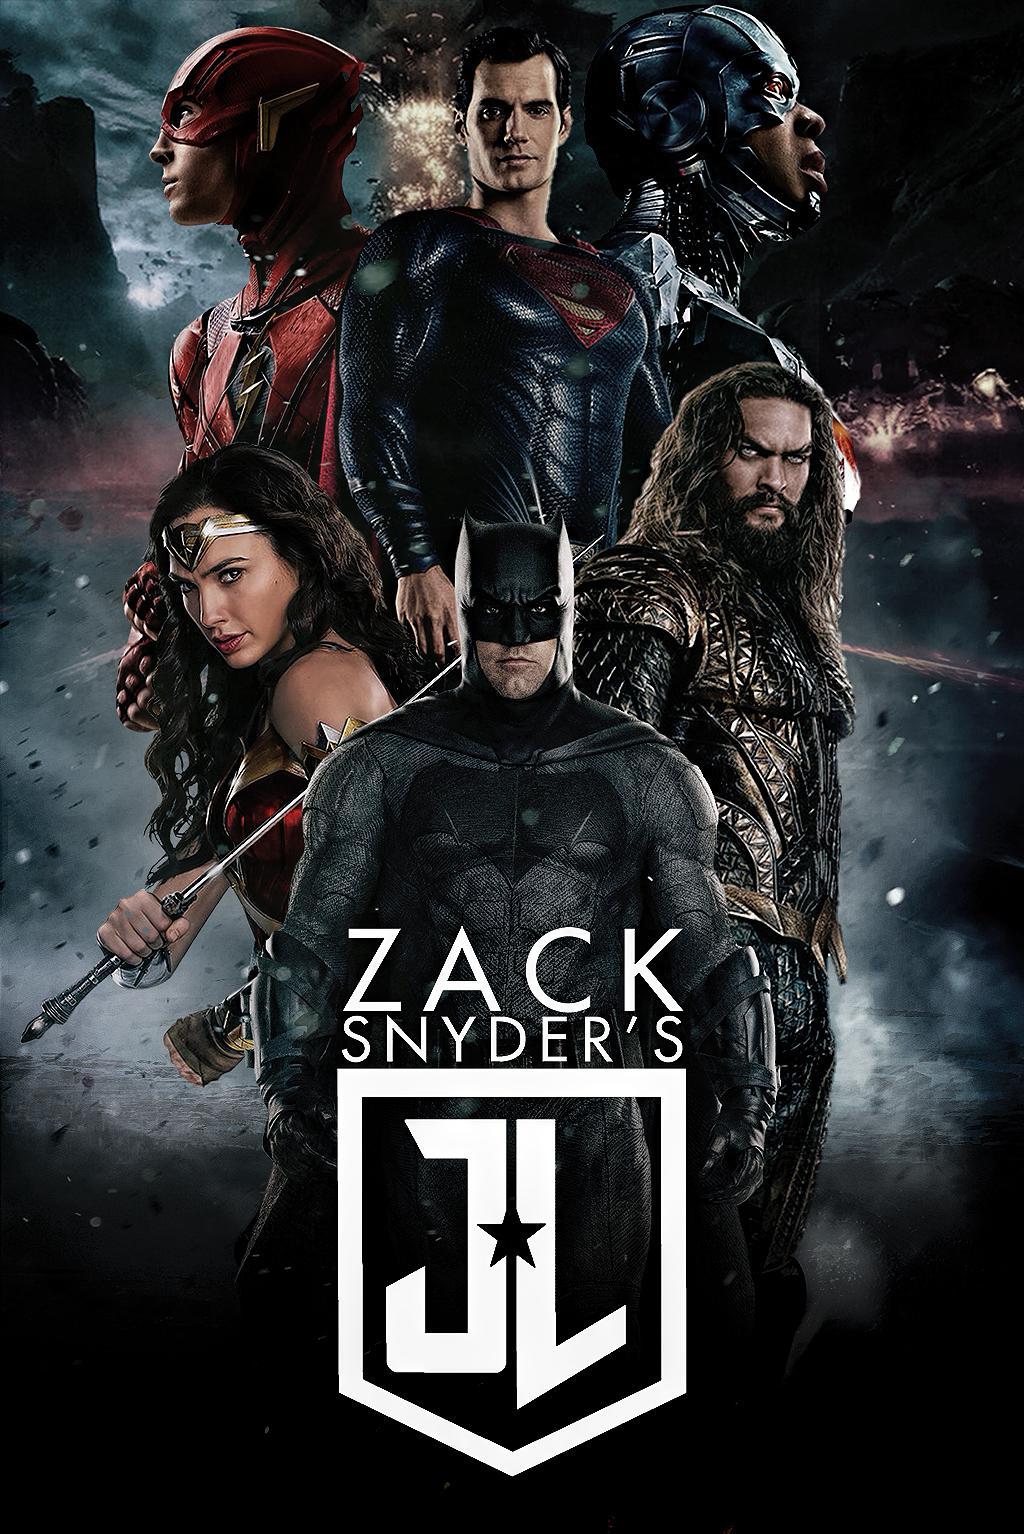 Zack Snyder’s Justice League 2021 Hindi Dubbed 720p HDRip 4GB Free Download